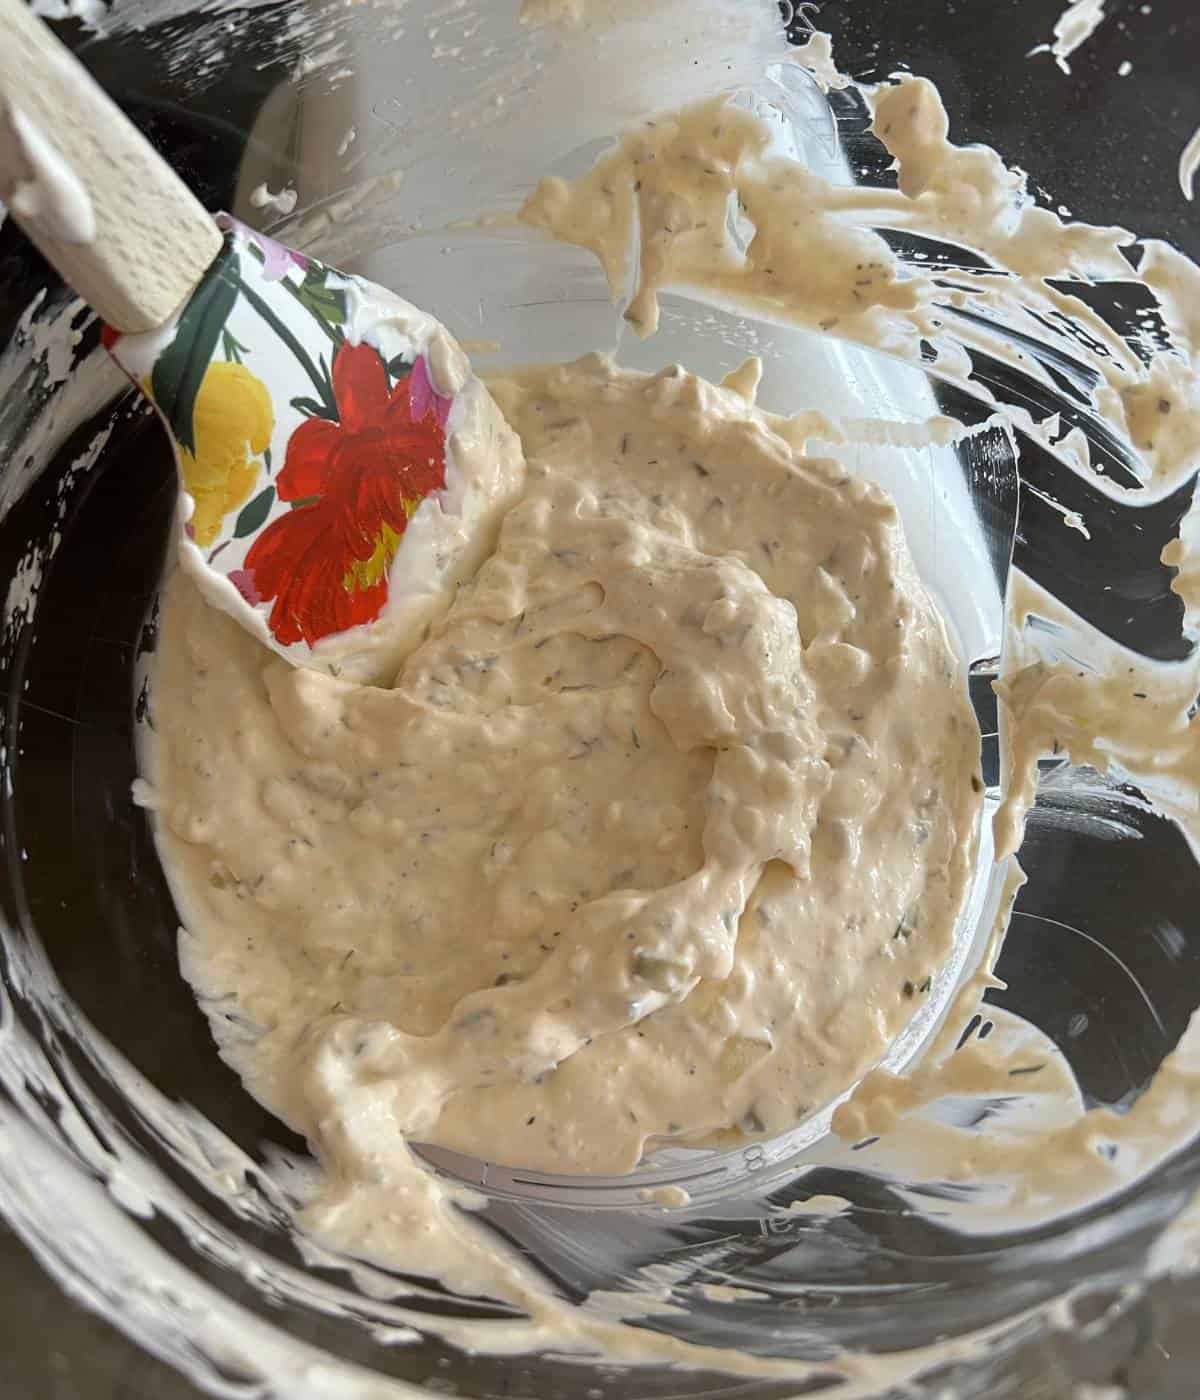 Creamy pickle dip in stand mixer.